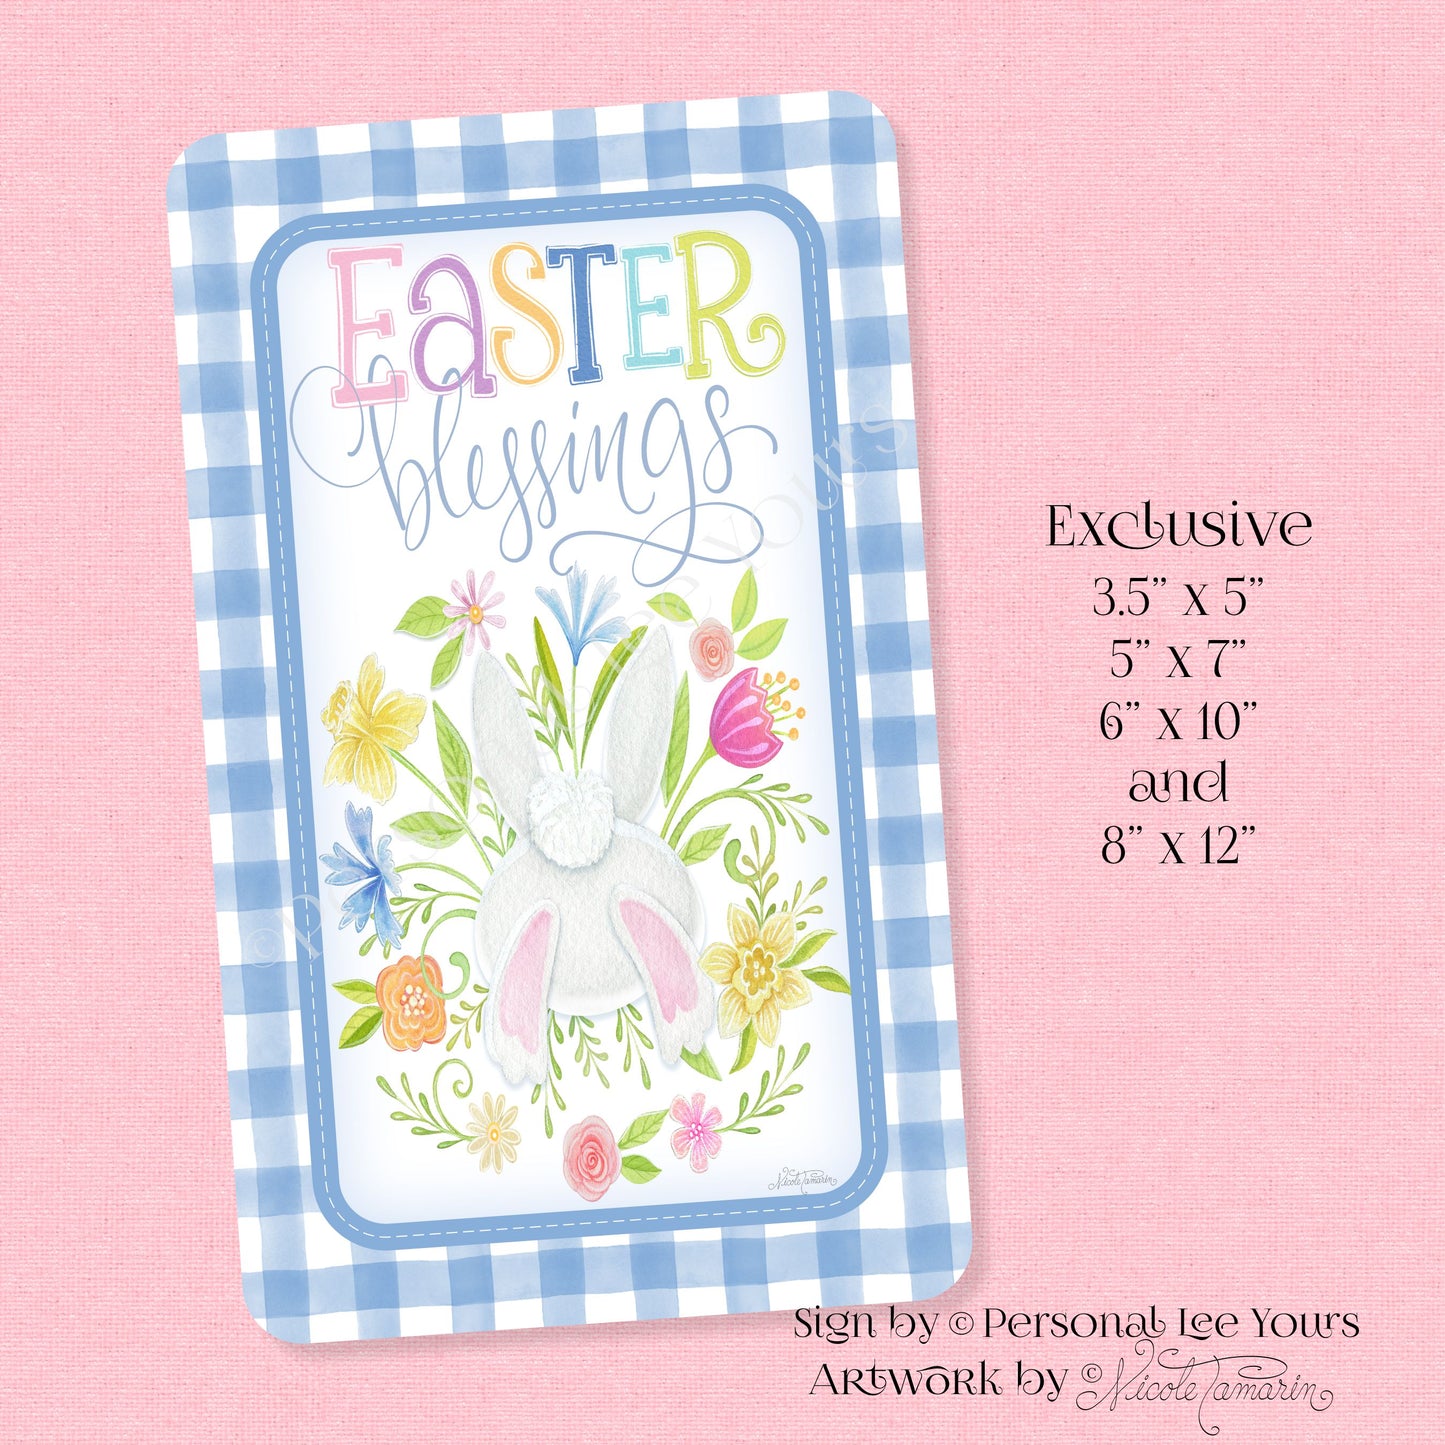 Nicole Tamarin Exclusive Sign * Easter Blessings Bunny * Vertical * Lightweight Metal